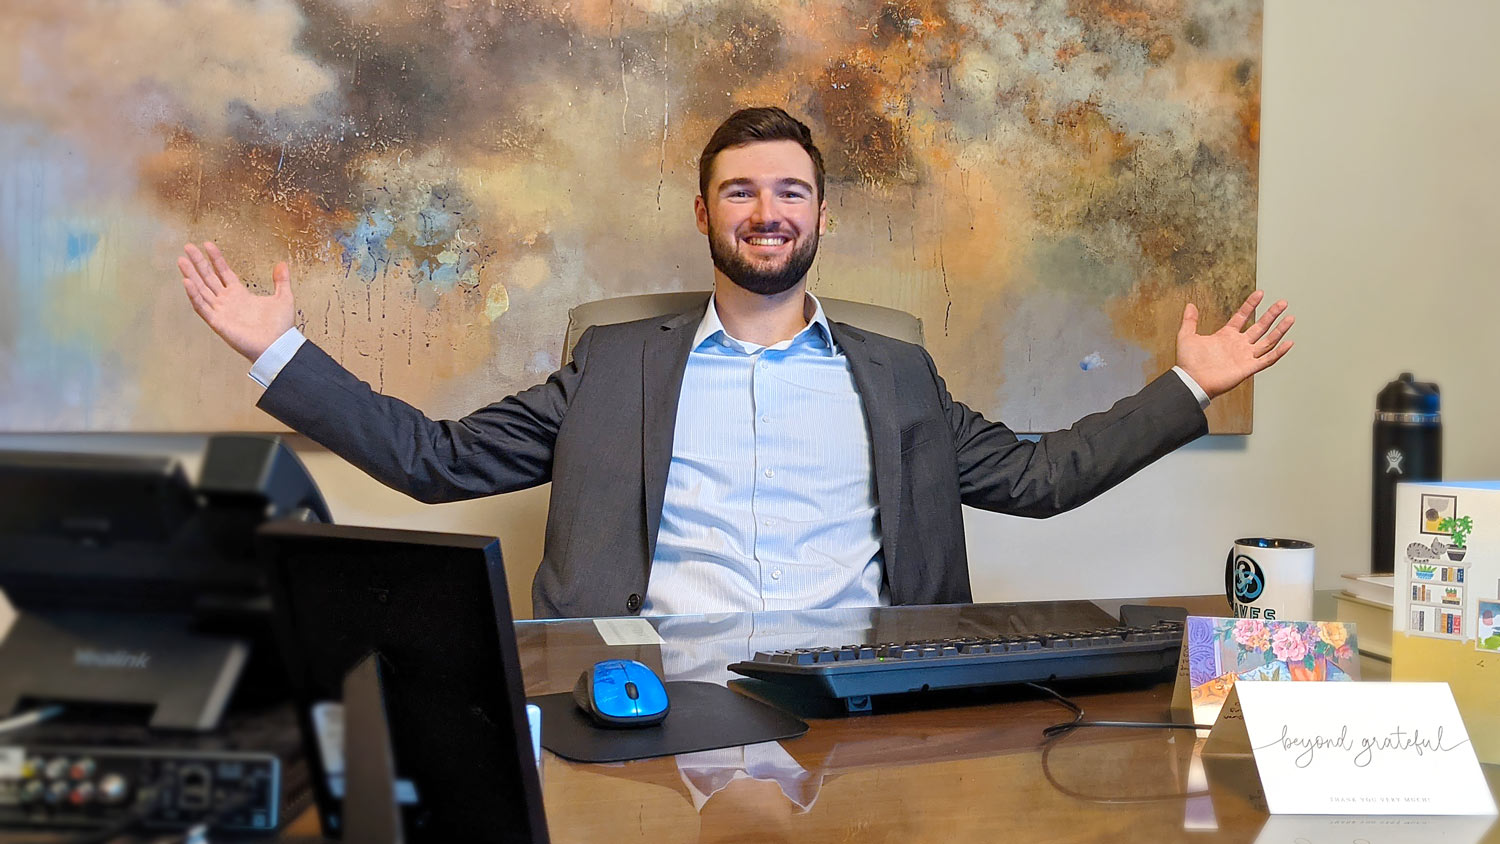 Financial Advisor Nate Tomkiewicz shows off his office at Berkshire Money Management in Dalton